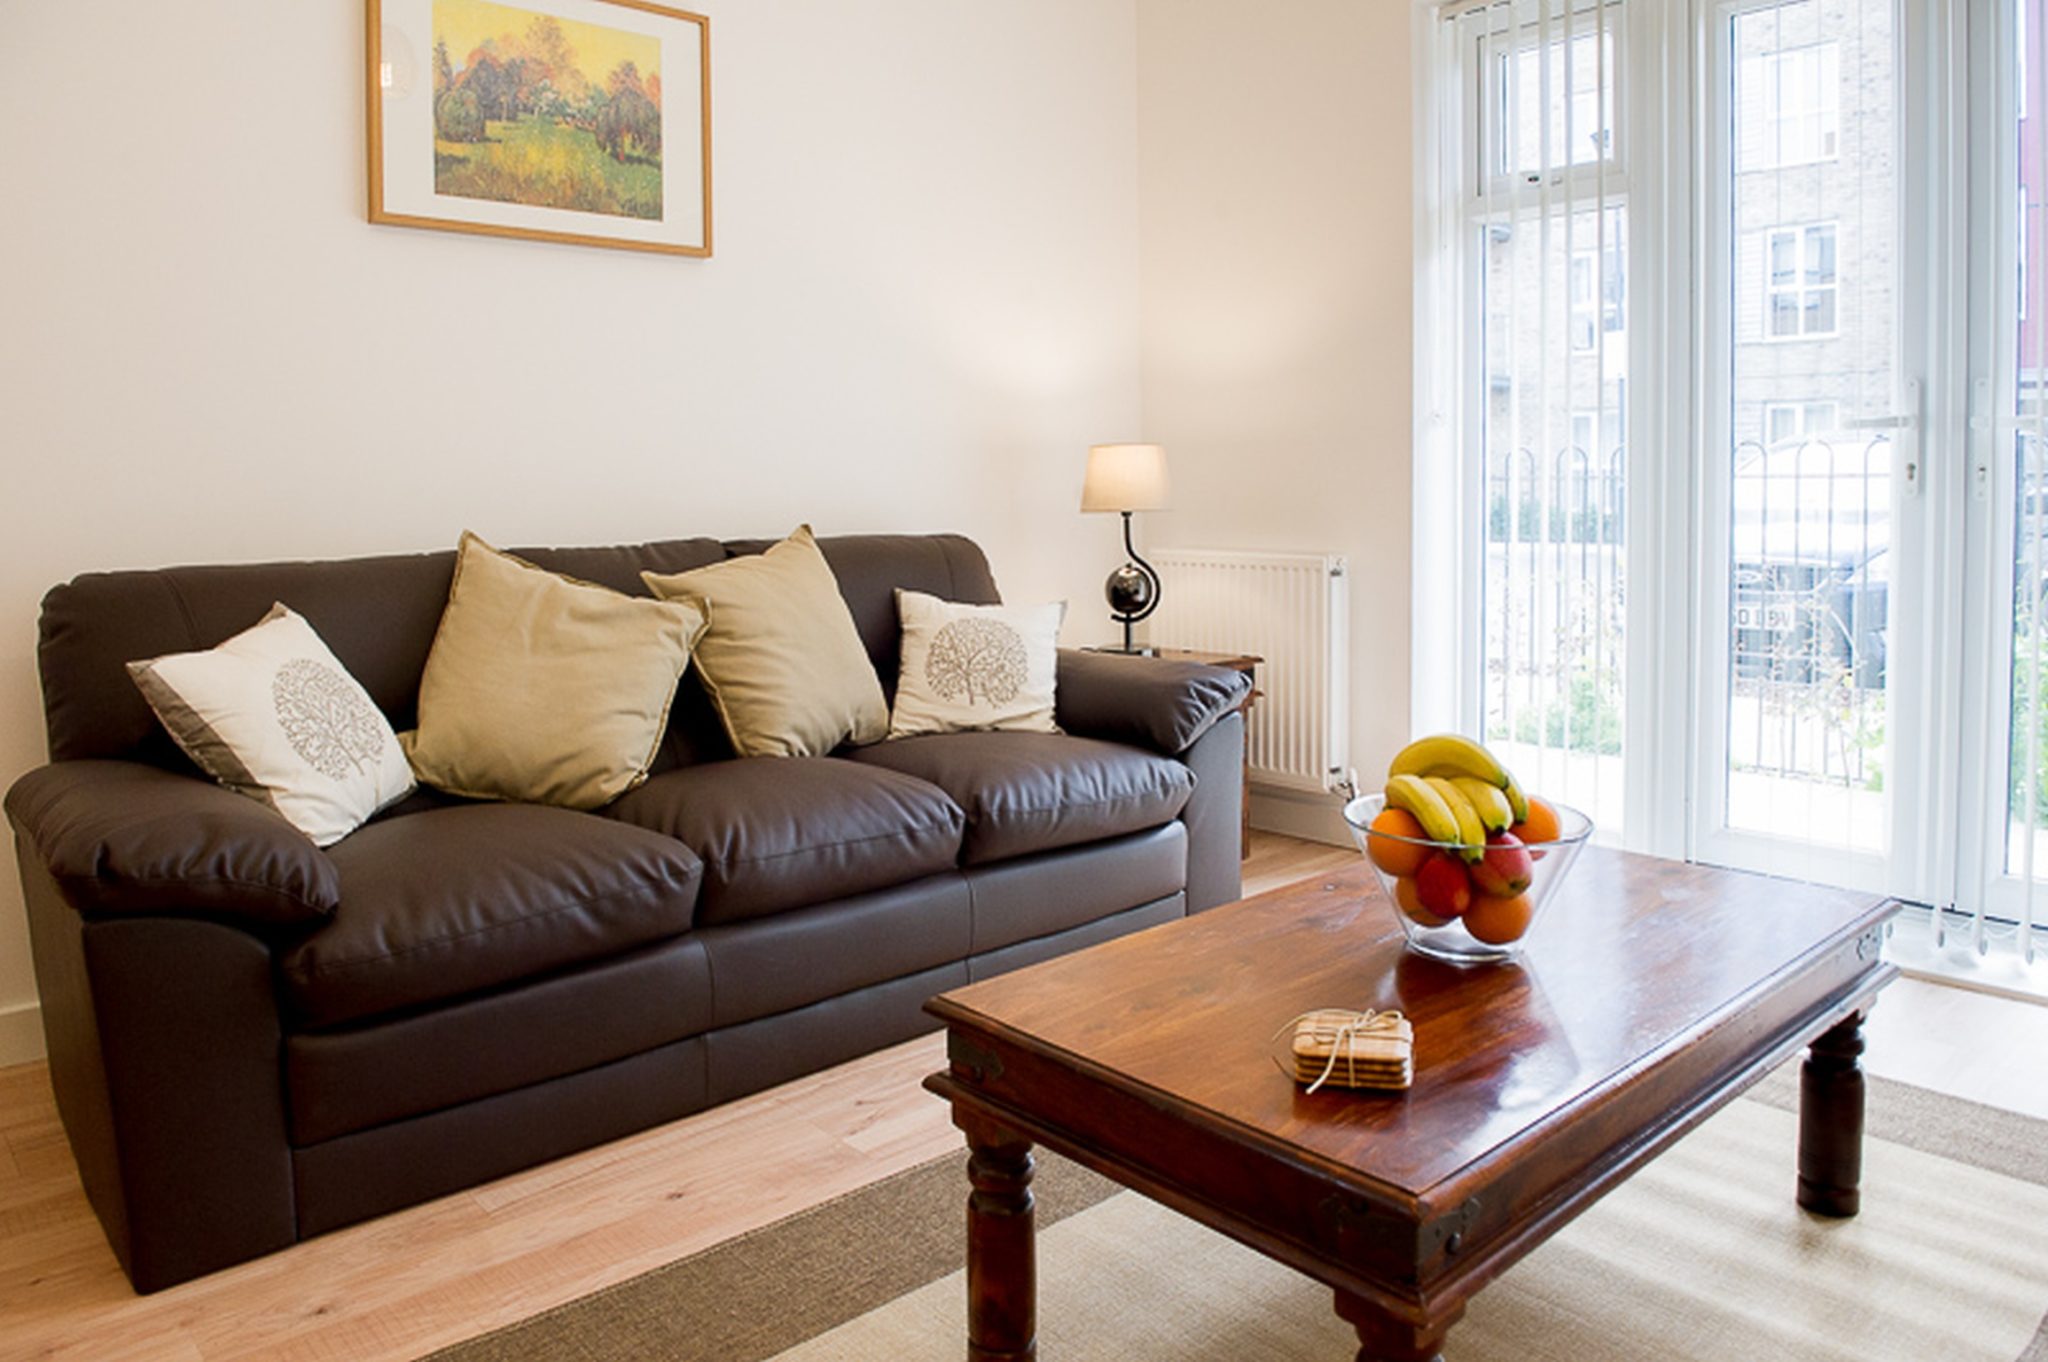 Albany House Apartments Serviced Apartments - West Drayton | Urban Stay